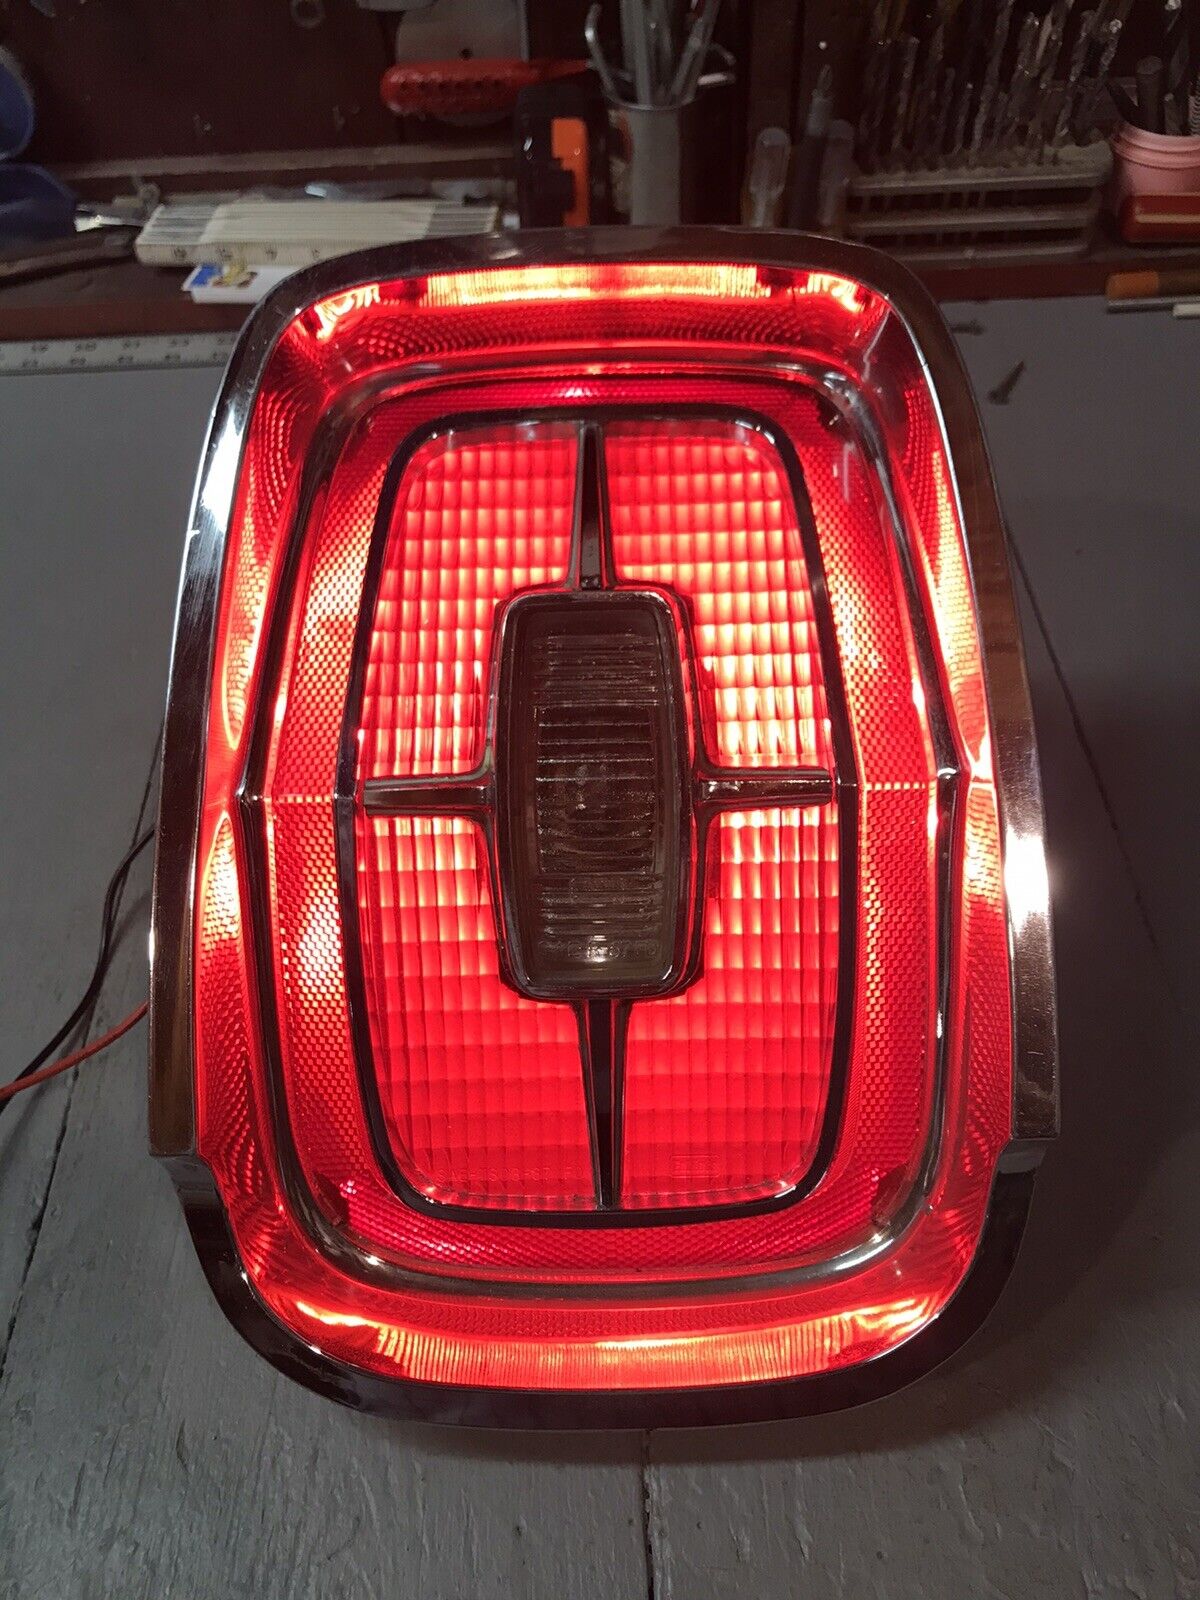 1967 67 Ford Galaxie 500 LTD XL 7 Liter tail light assembly In good condition